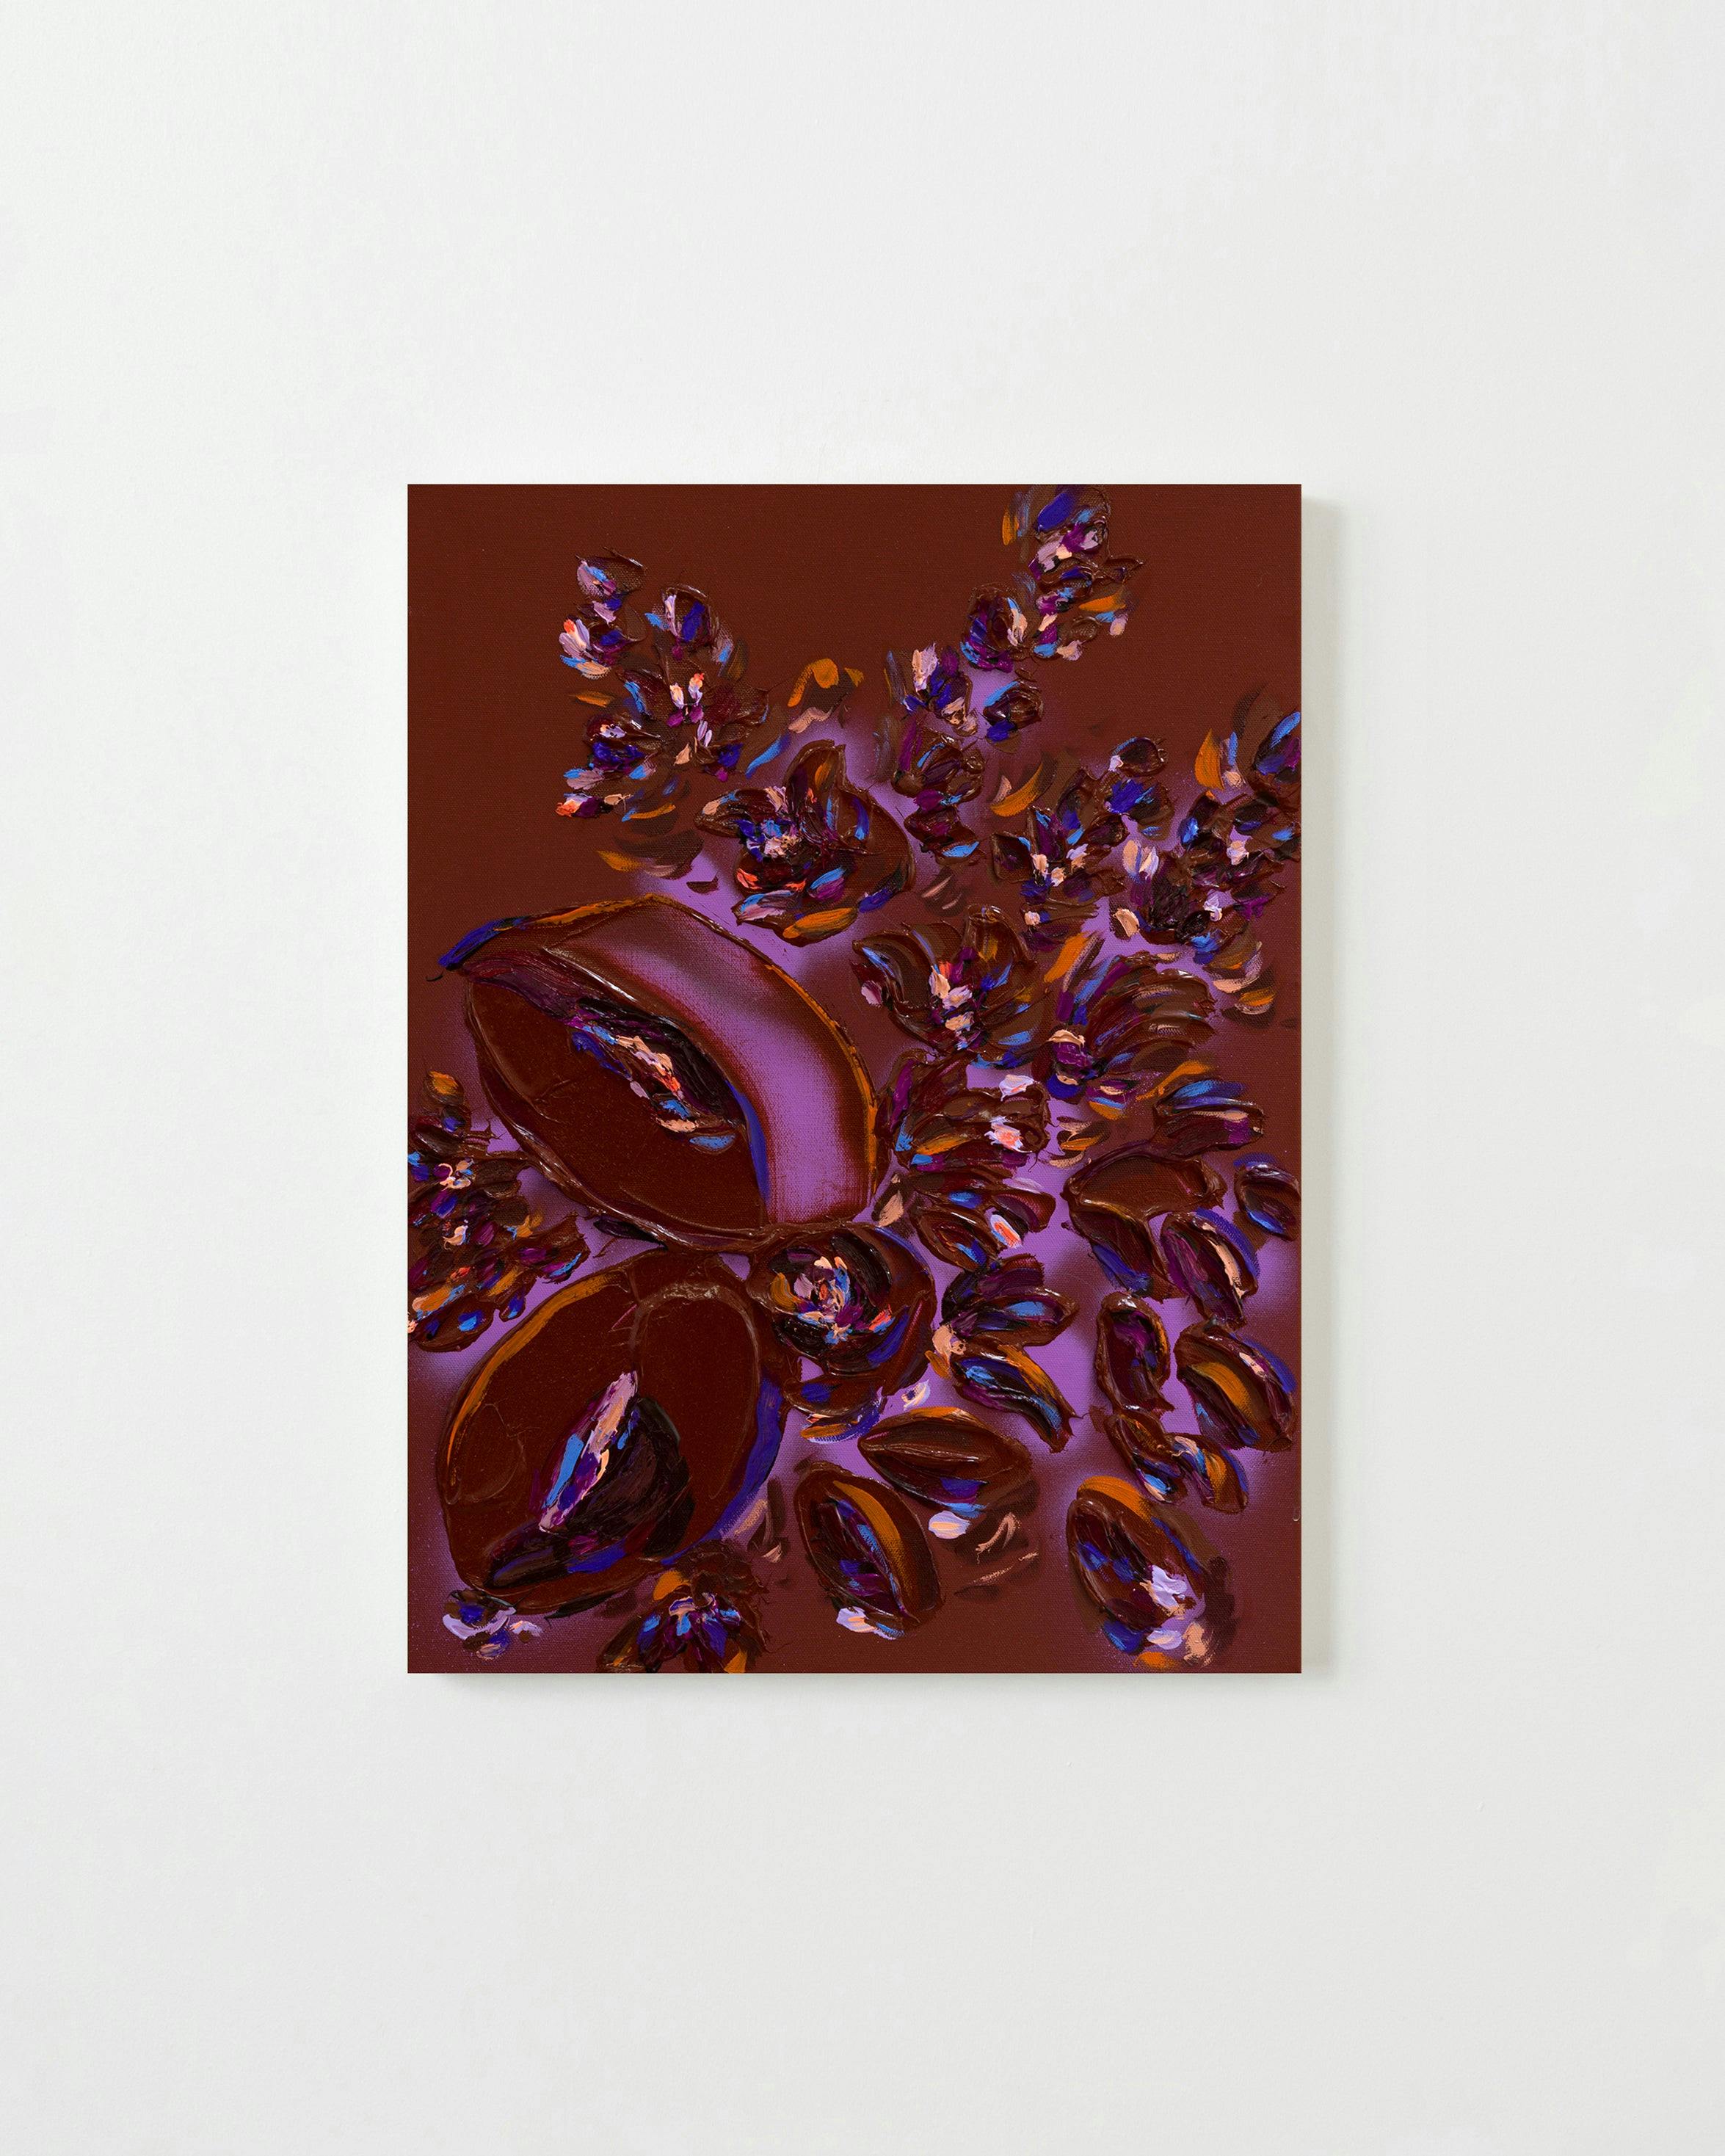 Painting by Erin Lynn Welsh titled "Botany Mono 68".